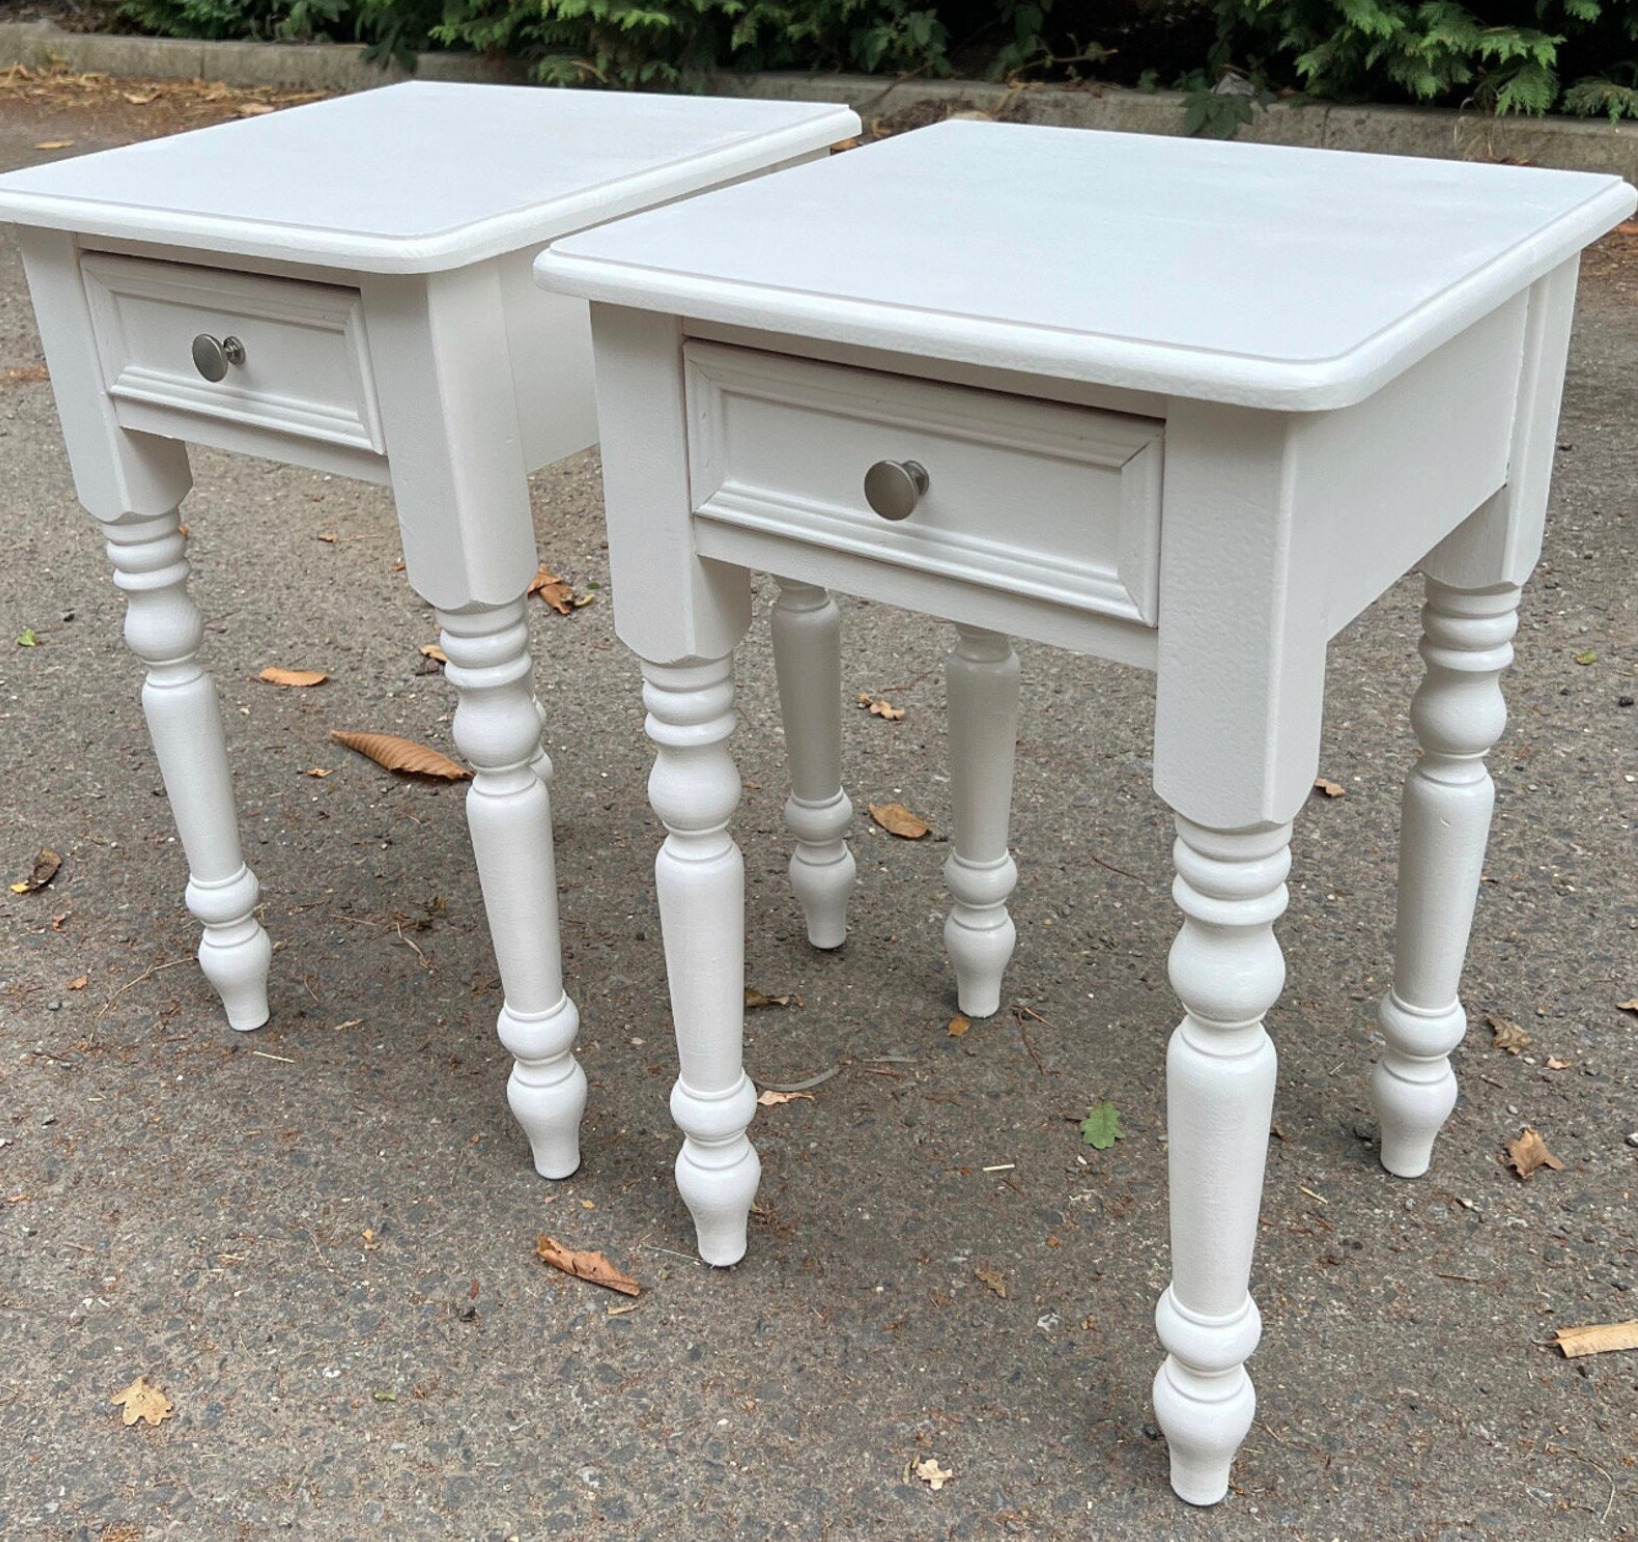 Victorian Style Decorative Bedside Tables – SOLD OUT!